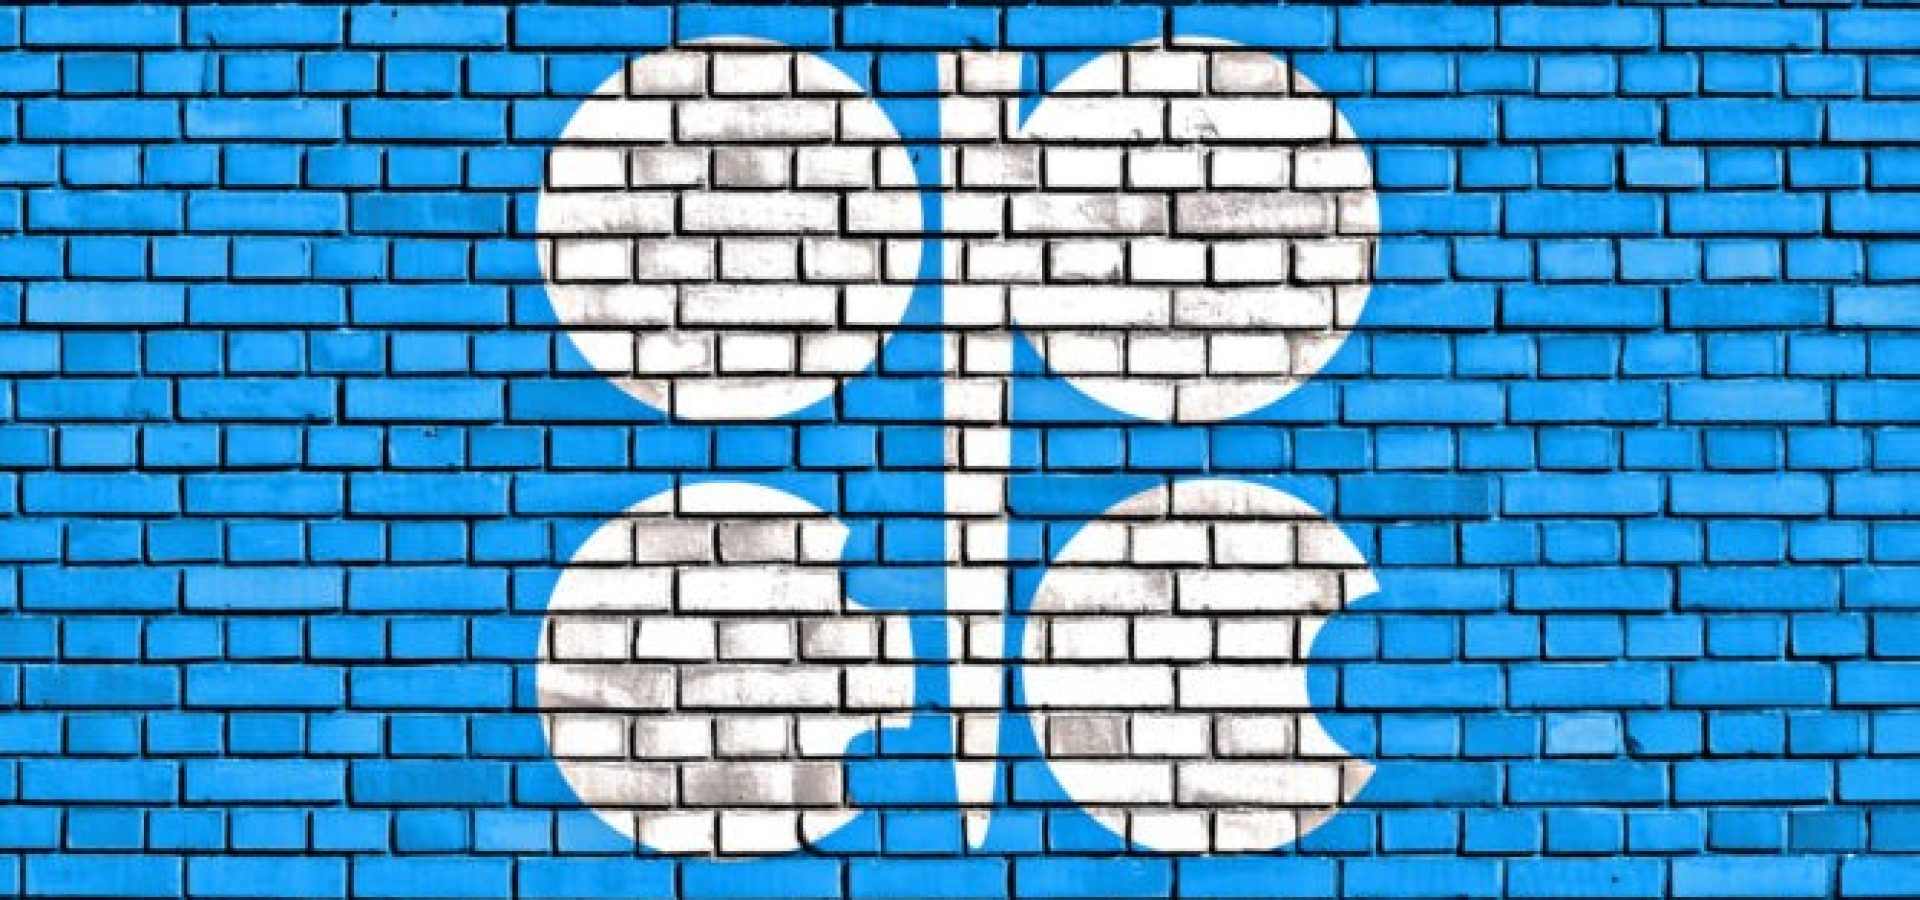 Wibest – Oil Petroleum: The OPEC's logo on a brick wall.